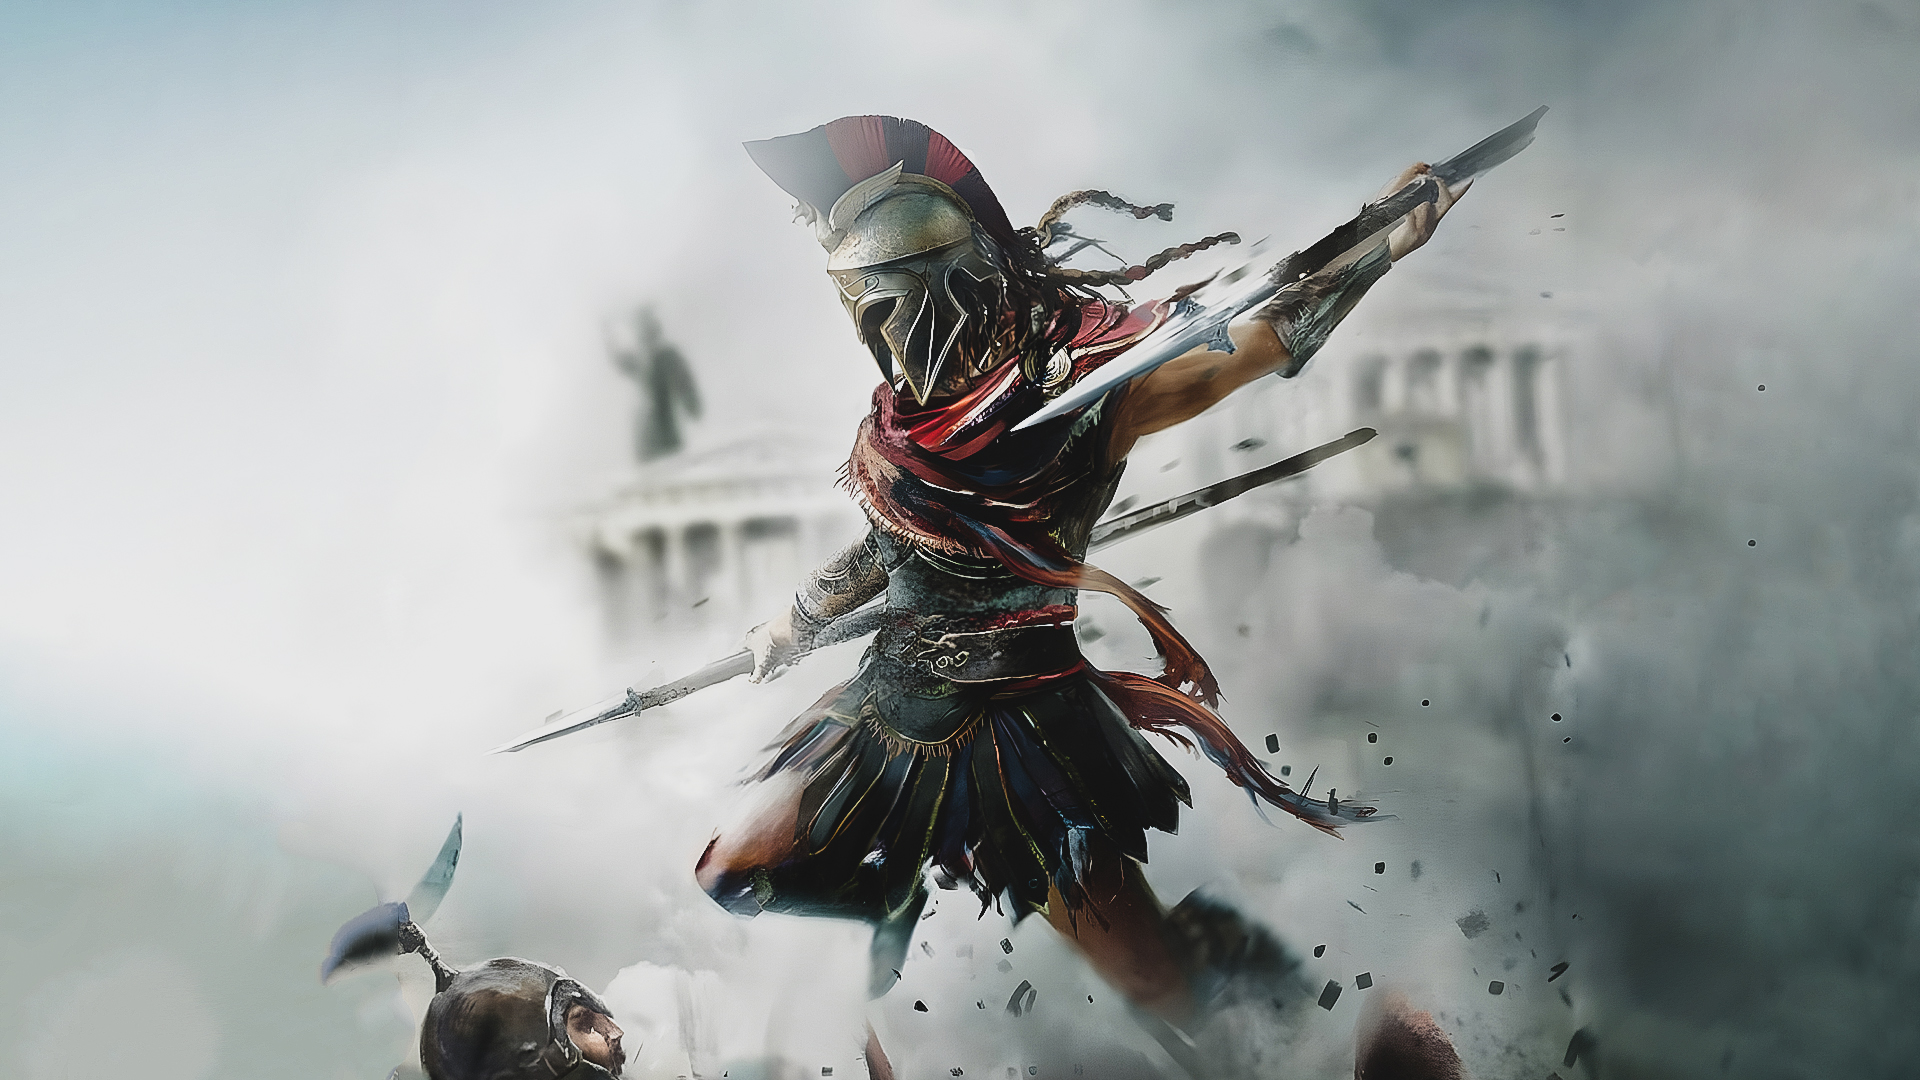 General 1920x1080 video games warrior concept art Ubisoft Alexios  Kassandra Assassin's Creed: Odyssey video game characters